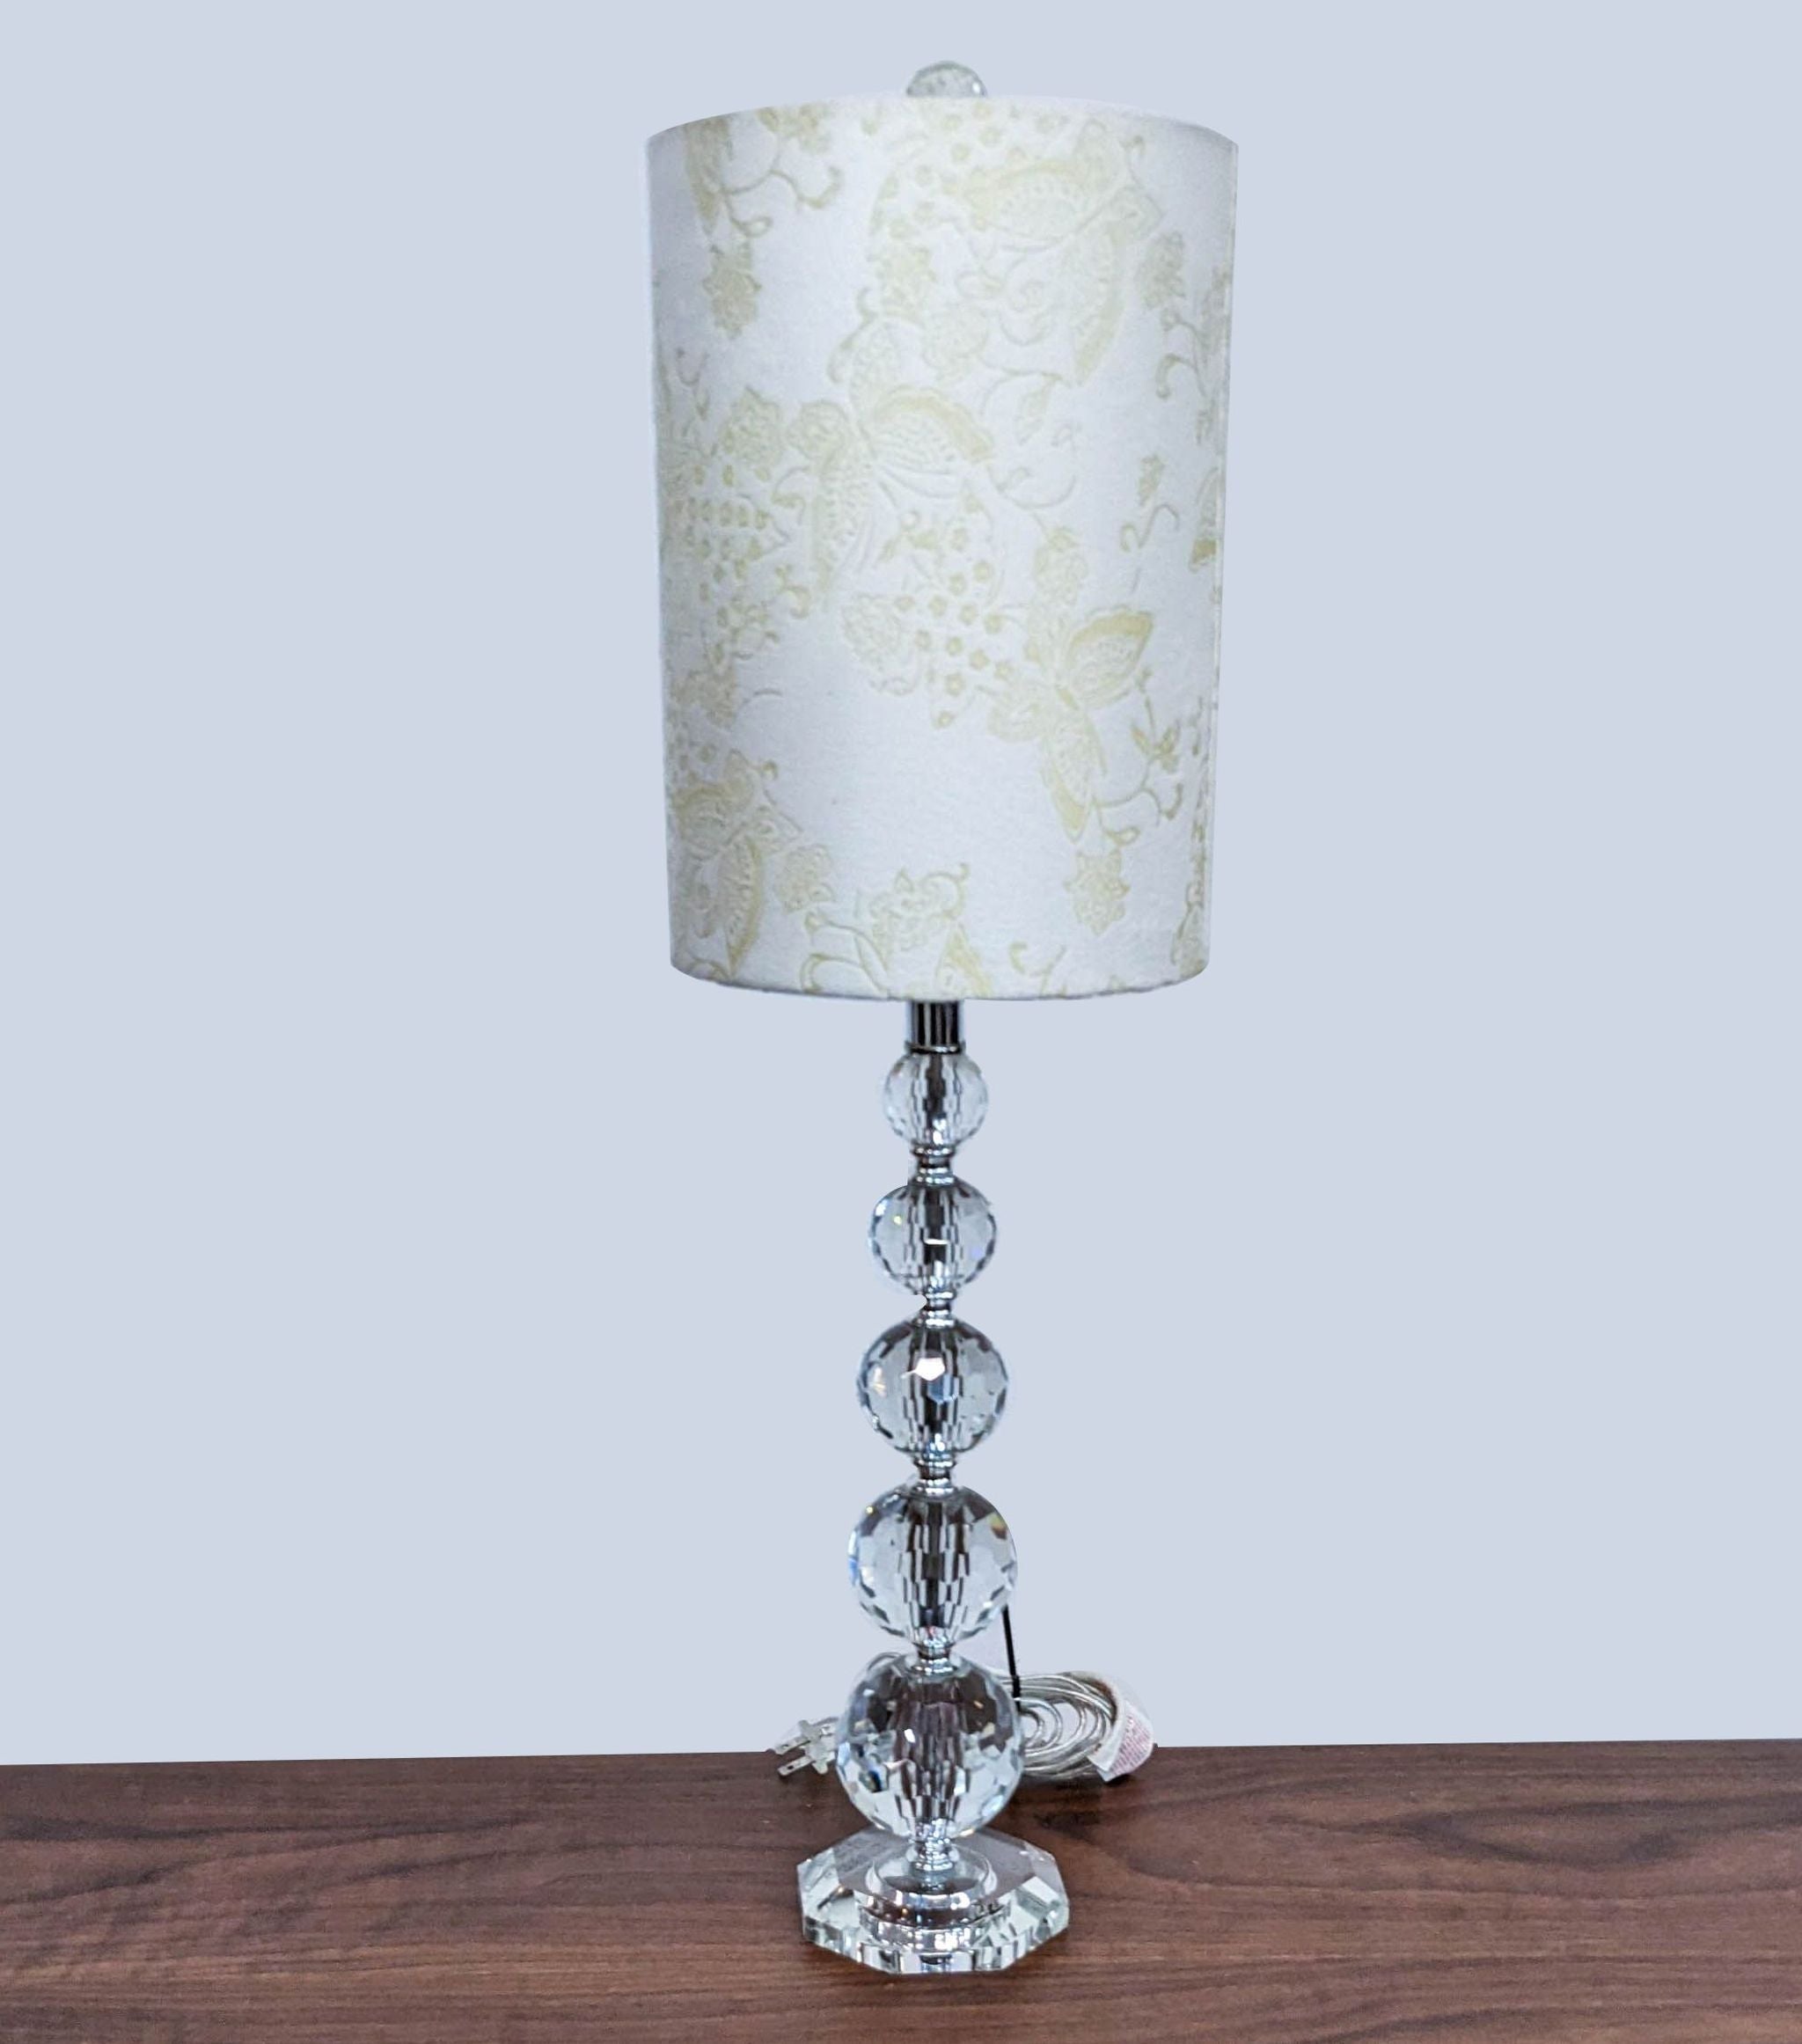 Reperch brand elegant table lamp with a patterned white shade and a stacked crystal base on a wooden surface.